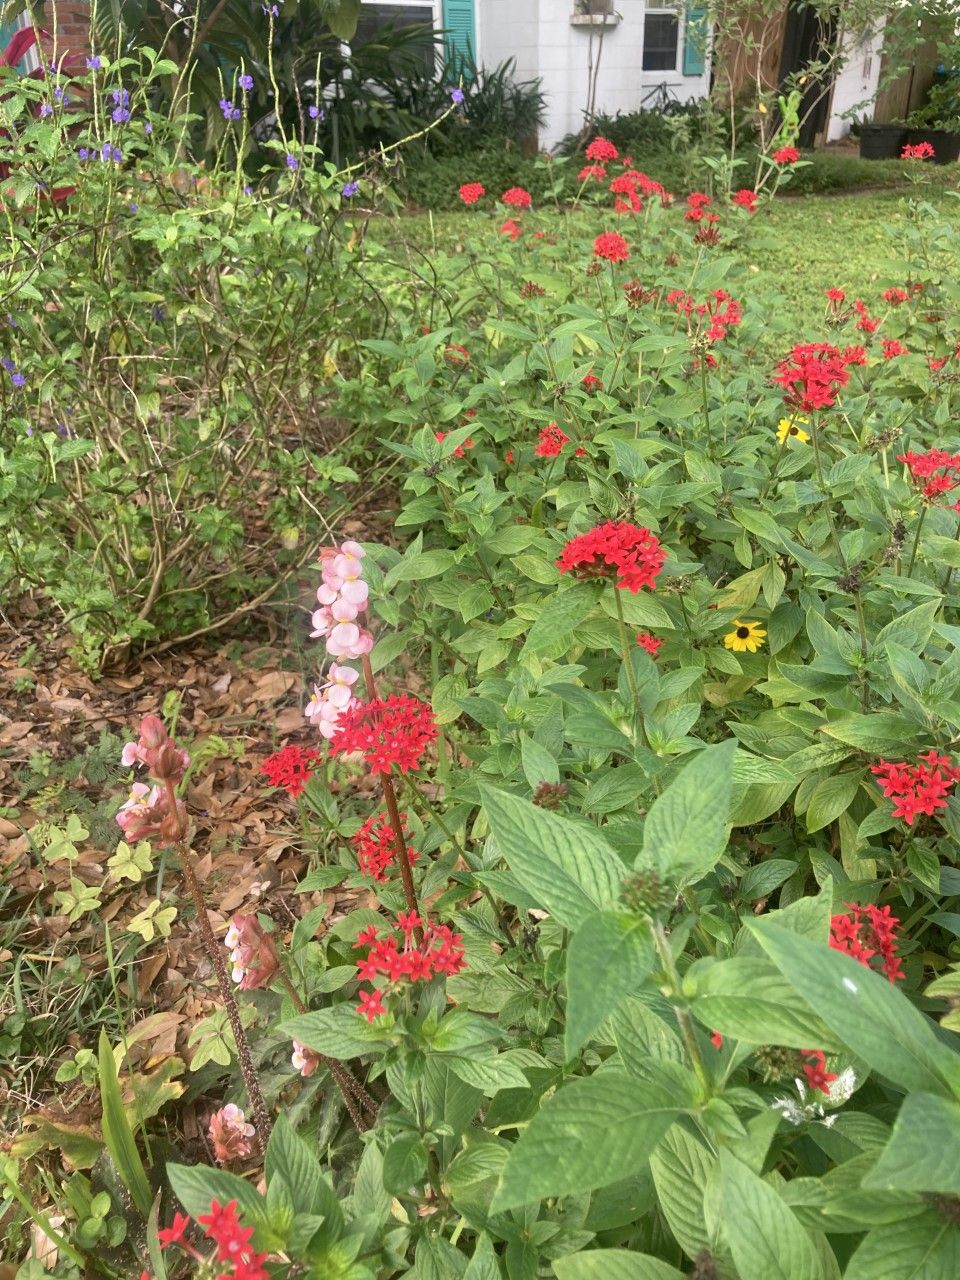 Pentas lanceolata (red) is interspersed with Helianthus debilis (yellow) and Stachytarpheta jamaicensis (purple) in the front yard of a residential home. 